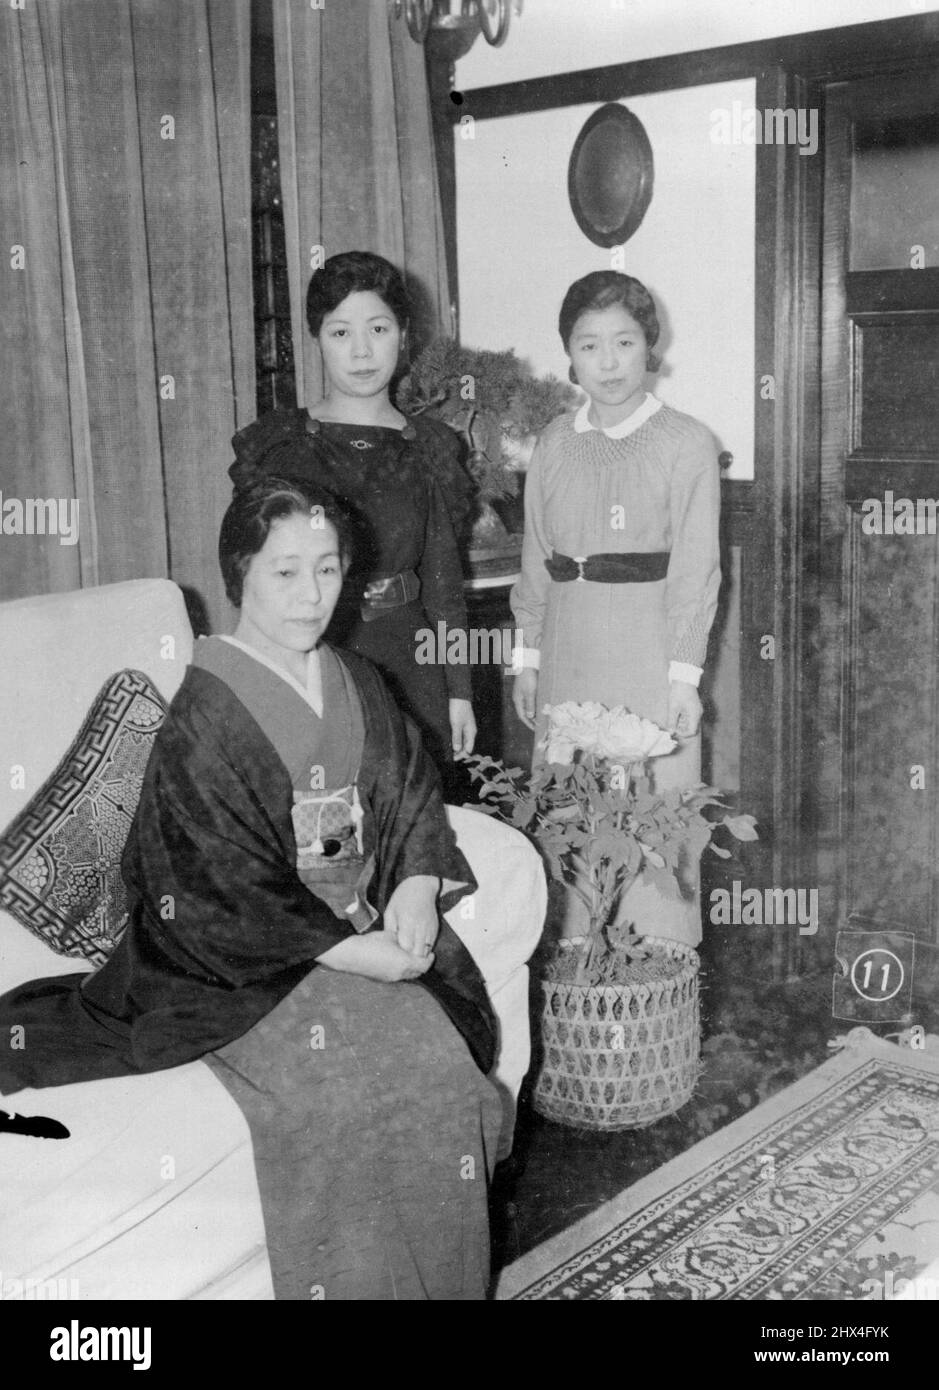 Mrs. Shizuko Hirota seating, with two daughters, Misses Toshiko (left) and Mivoko, photographed at their private residence this afternoon when Mr. Koki Hirot a has finally succeeded in formation of the new Cabinet after 4- days strugle with Army and other quarters, since receiving the Imperial Command. March 9, 1936. (Photo by The Domei News Photos Service). Stock Photo